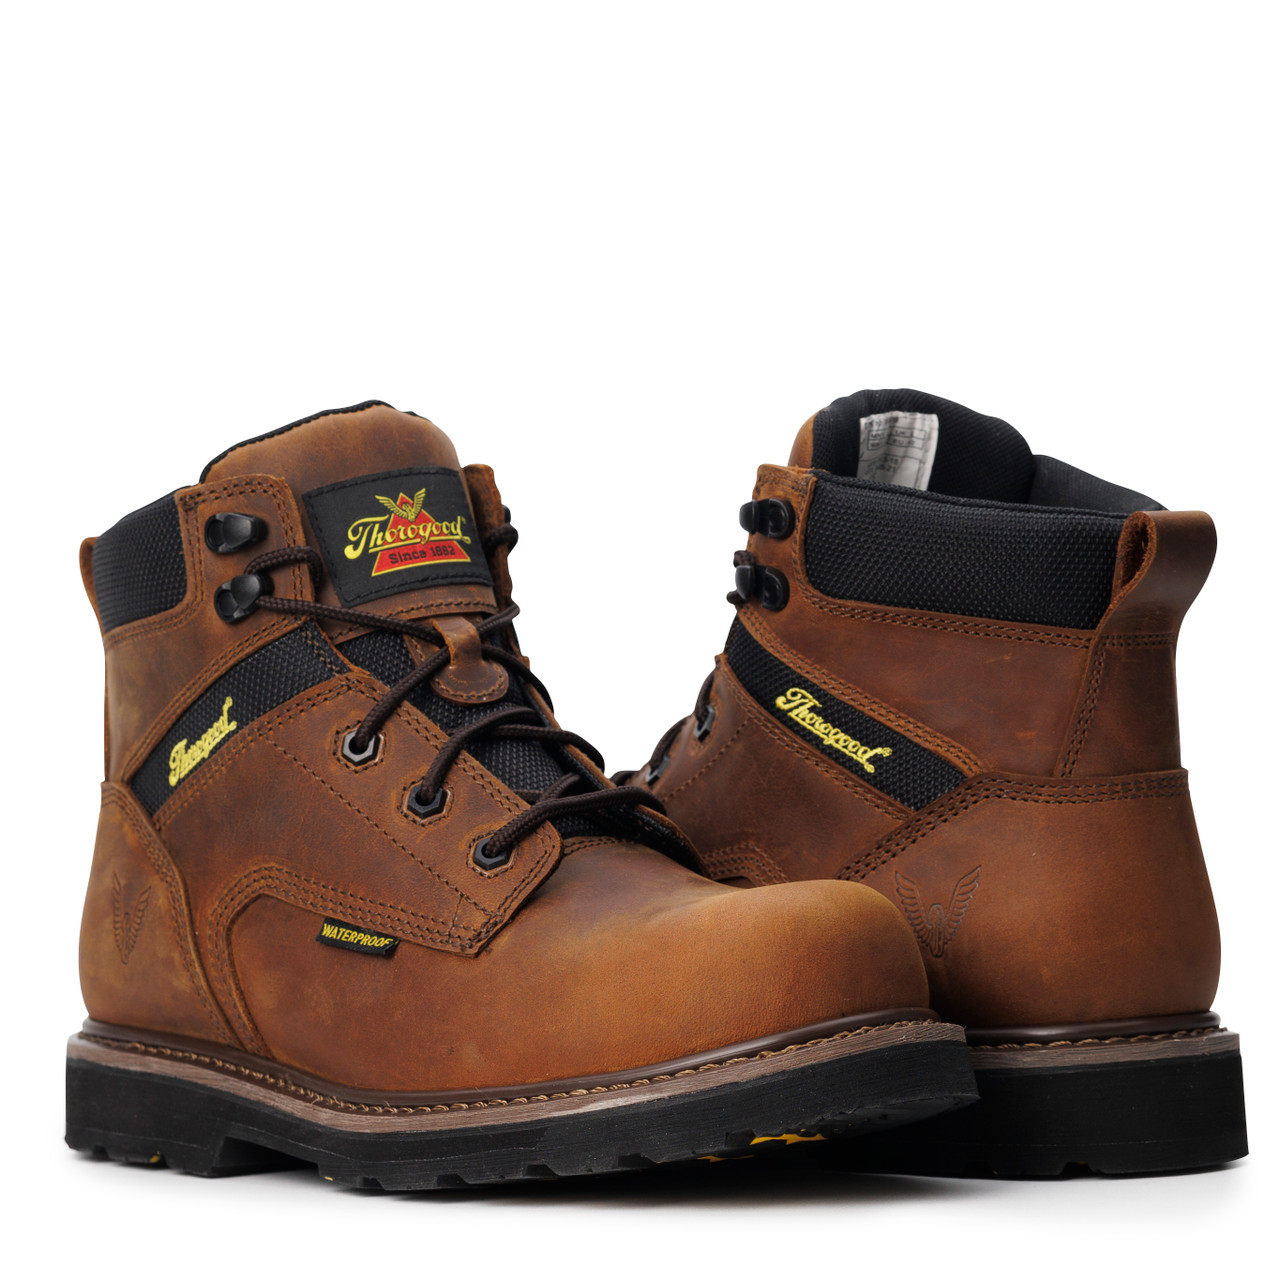 THOROGOOD JOB-SITE SERIES – 6″ CRAZY HORSE WATERPROOF SAFETY TOE BOOTS 804-4143